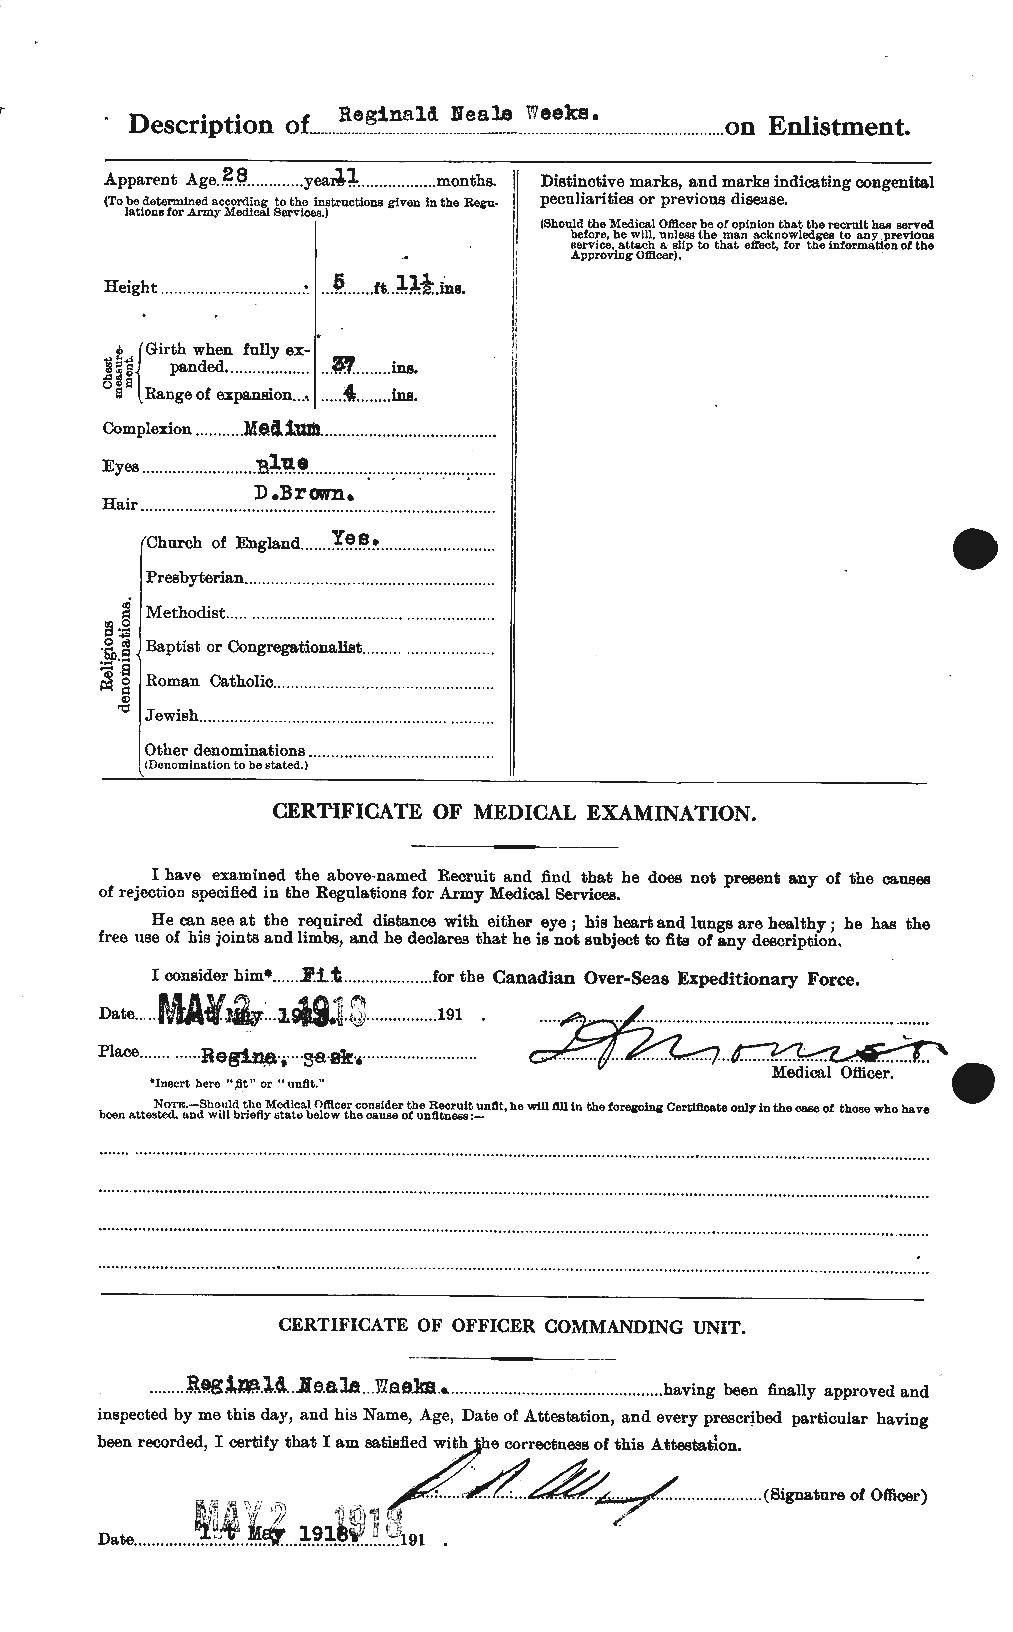 Personnel Records of the First World War - CEF 663523b